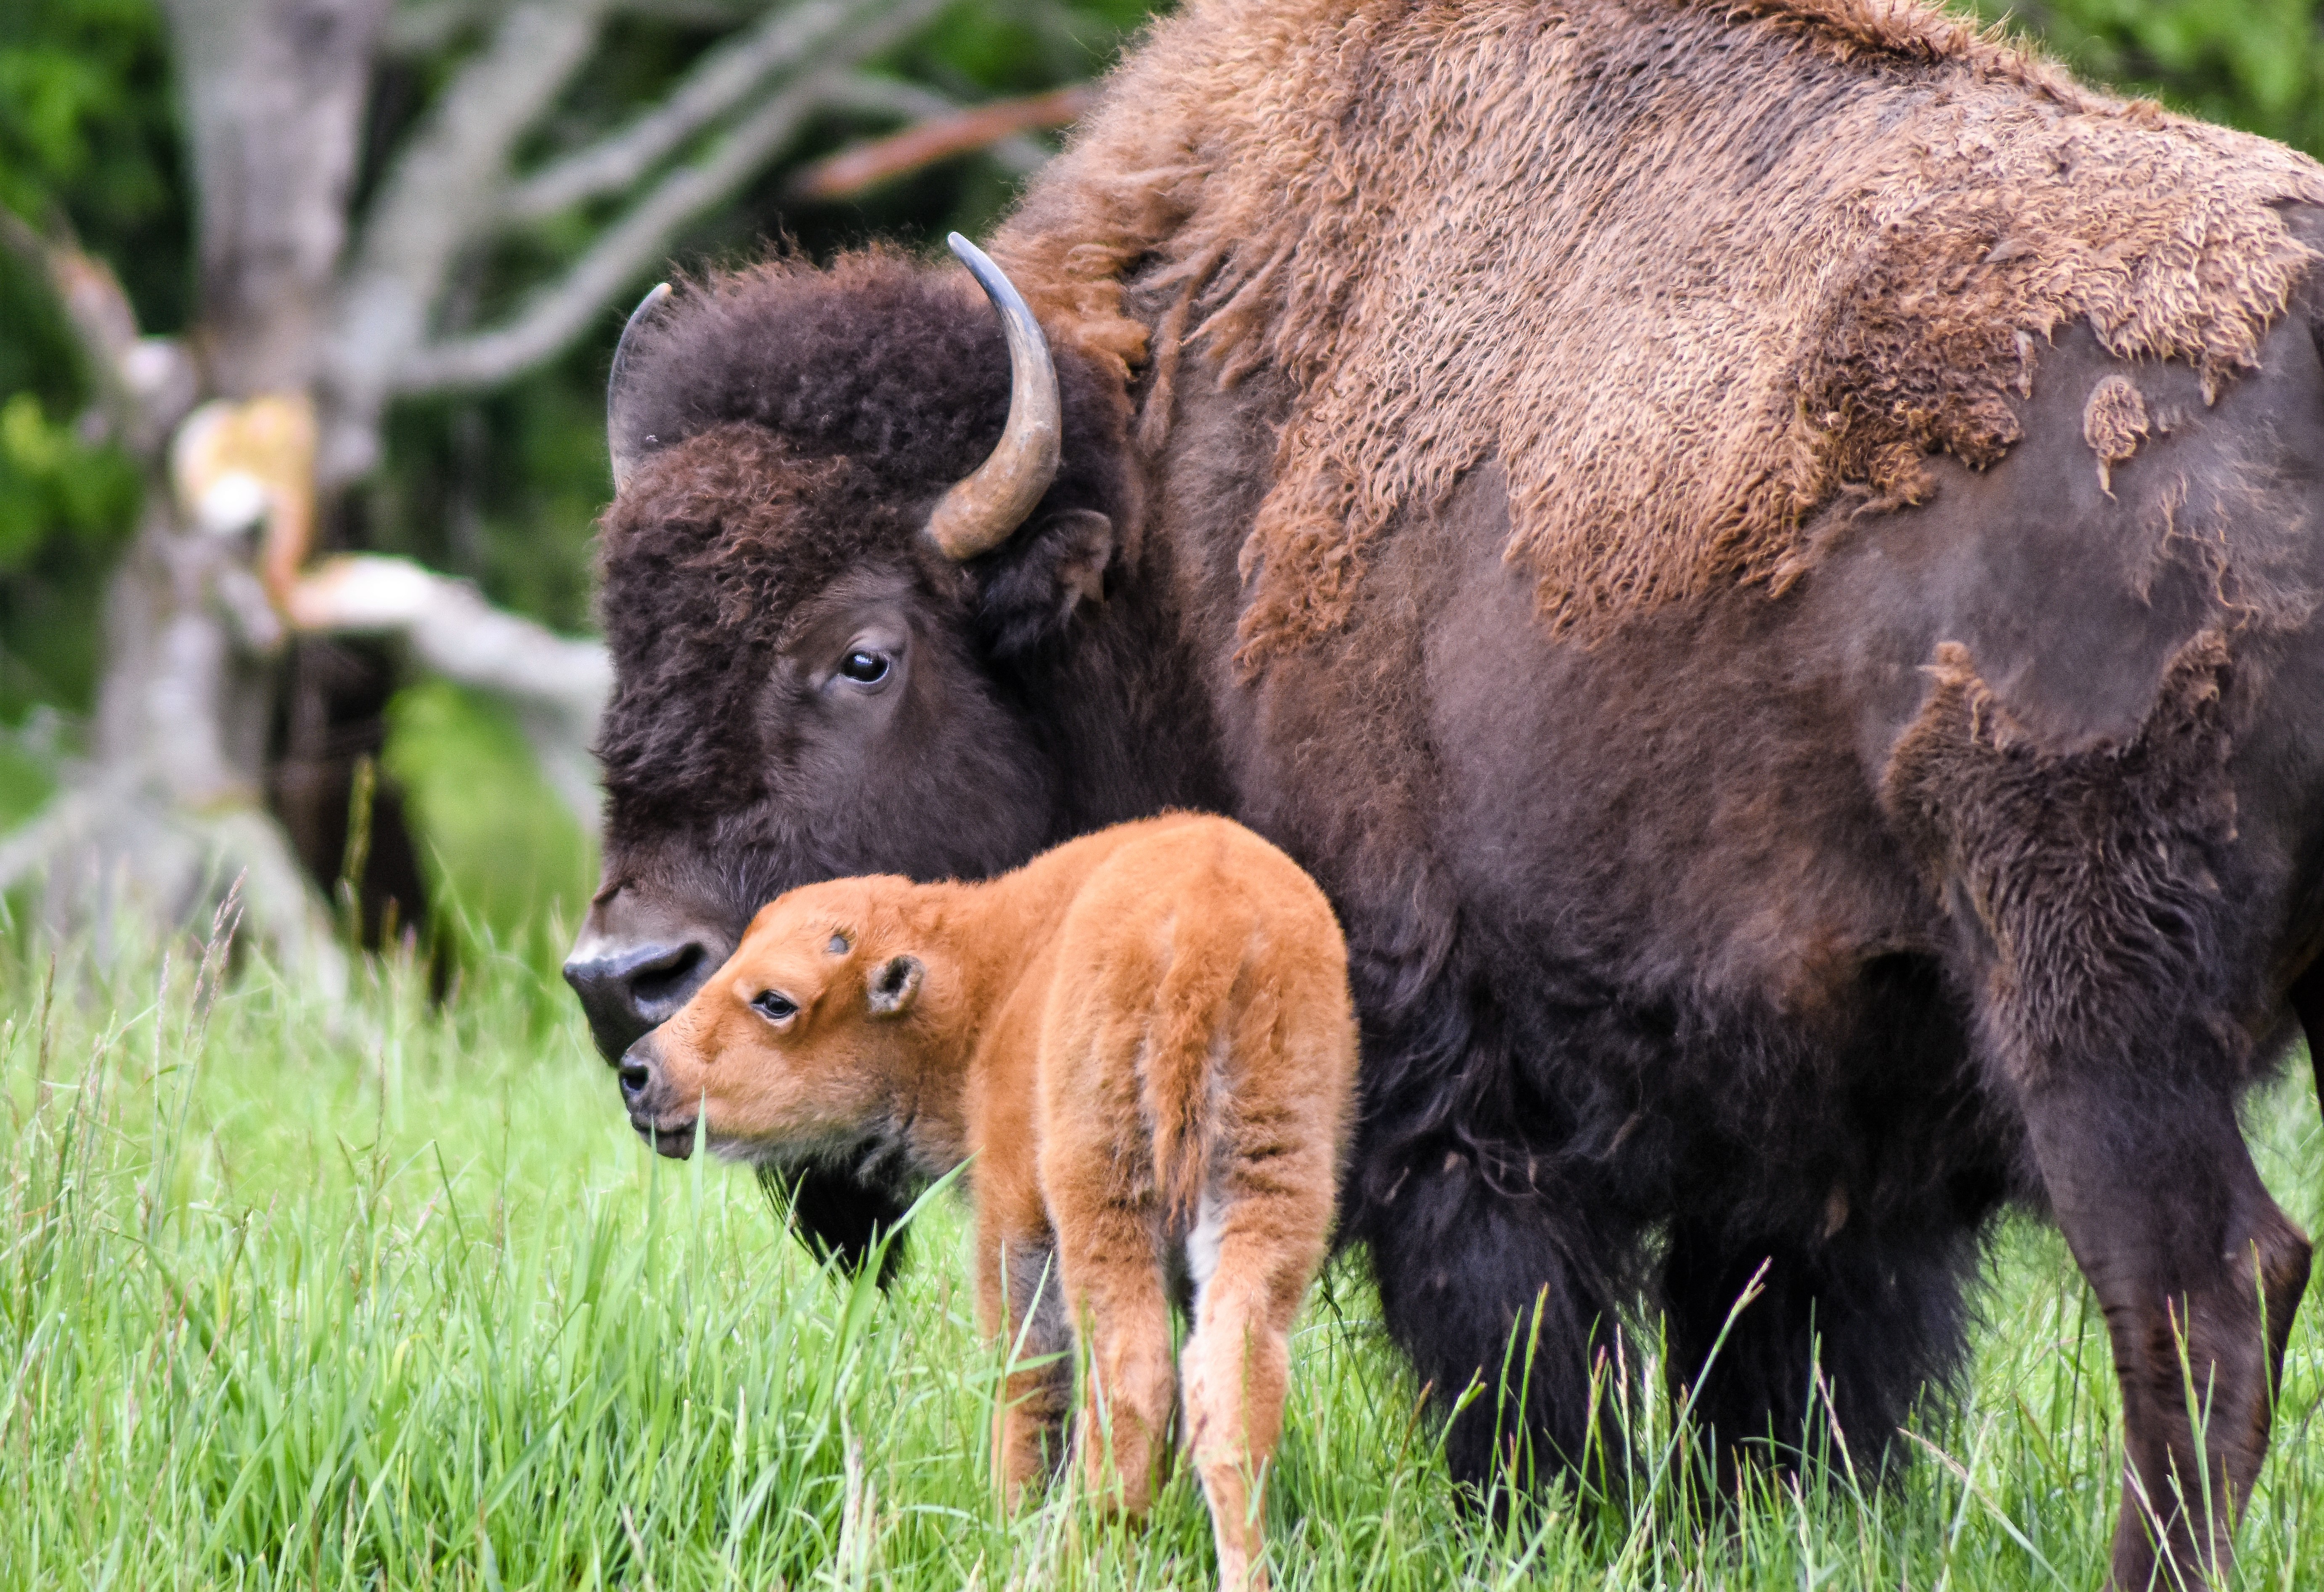 A bison mother and calf kiss at Northwest Trek Wildlife Park in May 2017